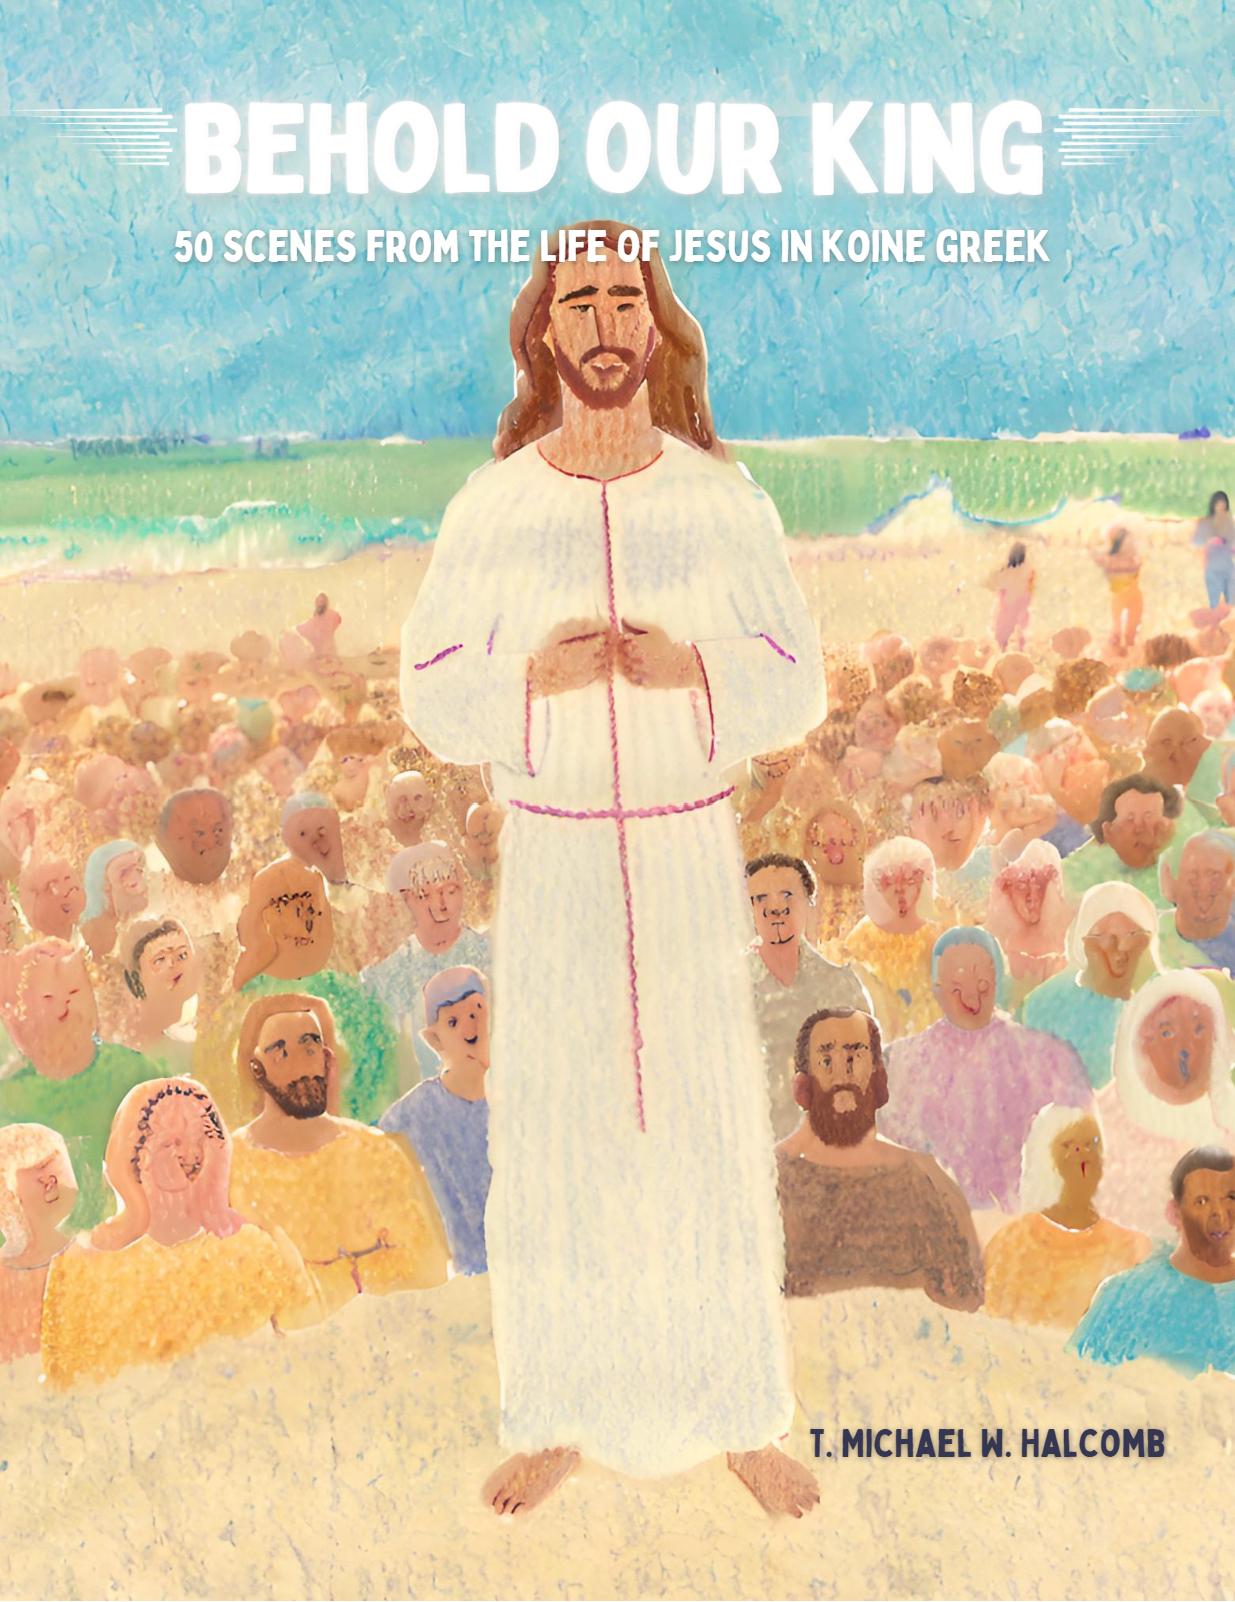 Behold Our King: 50 Scenes from the Life of Jesus in Koine Greek